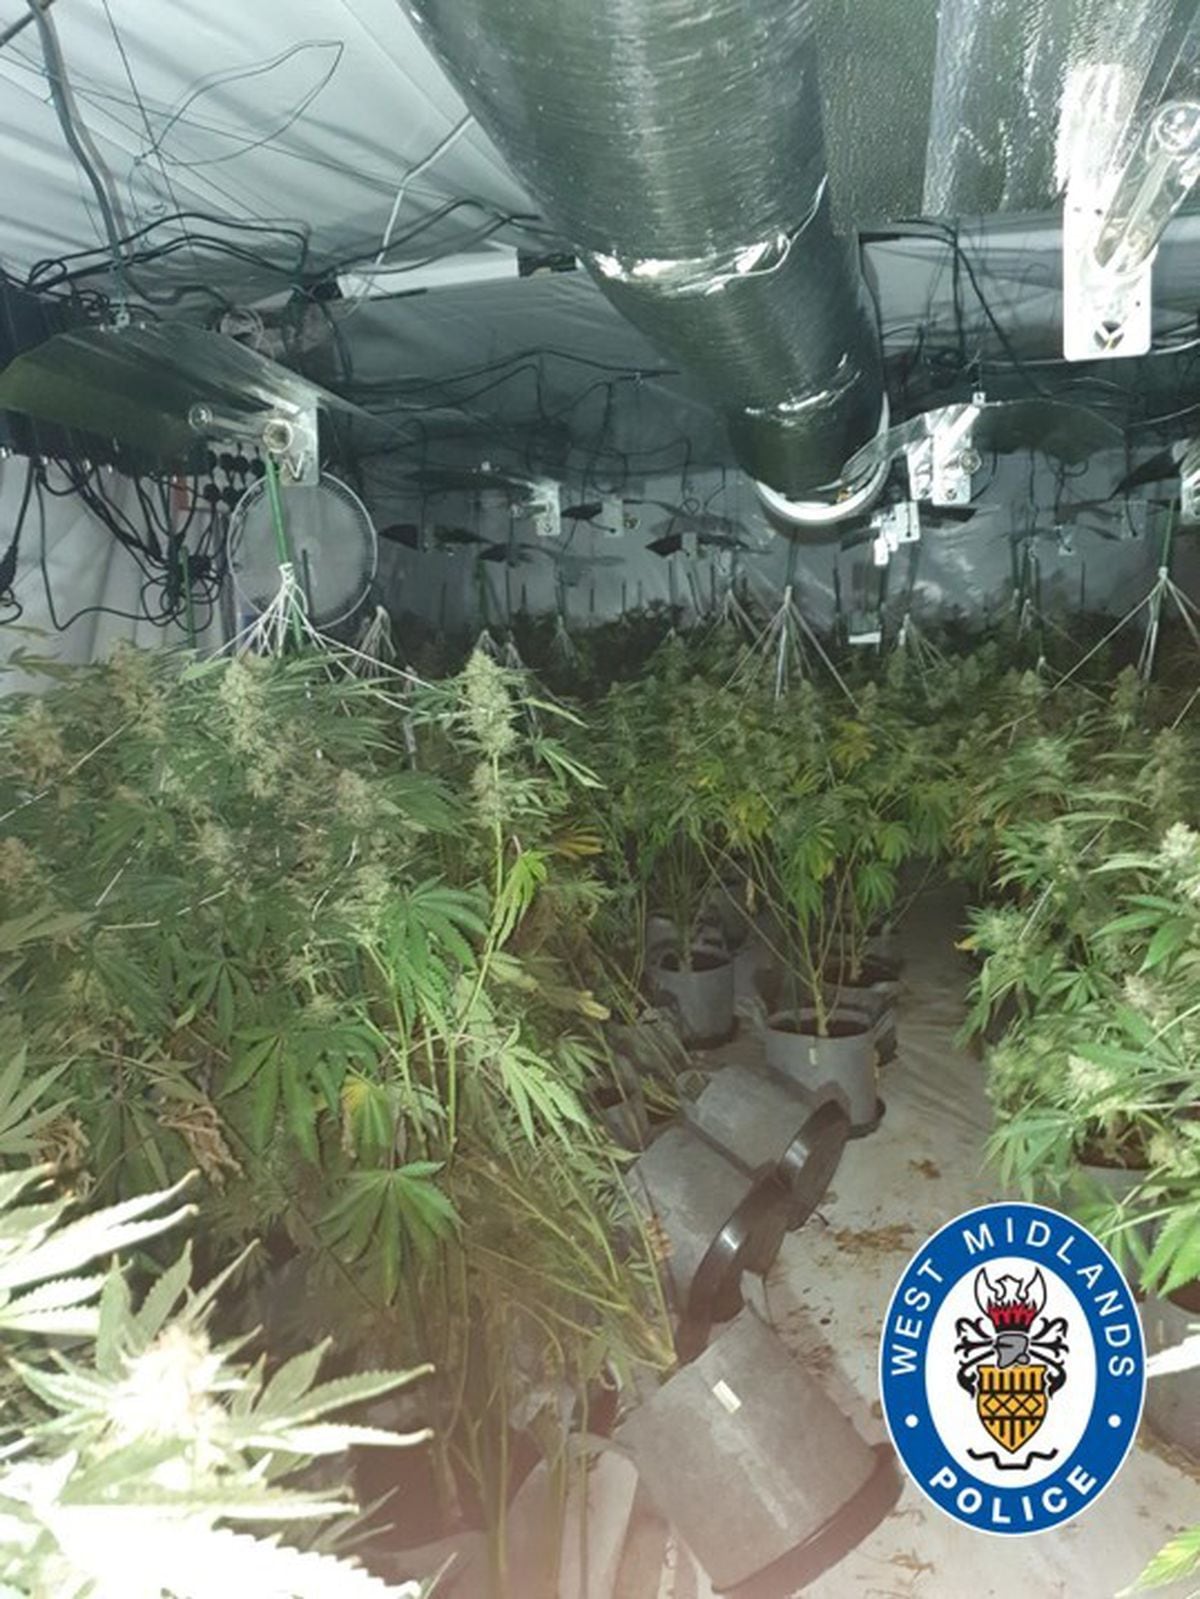 Around 1,000 plants were seized as part of the police raid, with an estimated street value of over £1 million